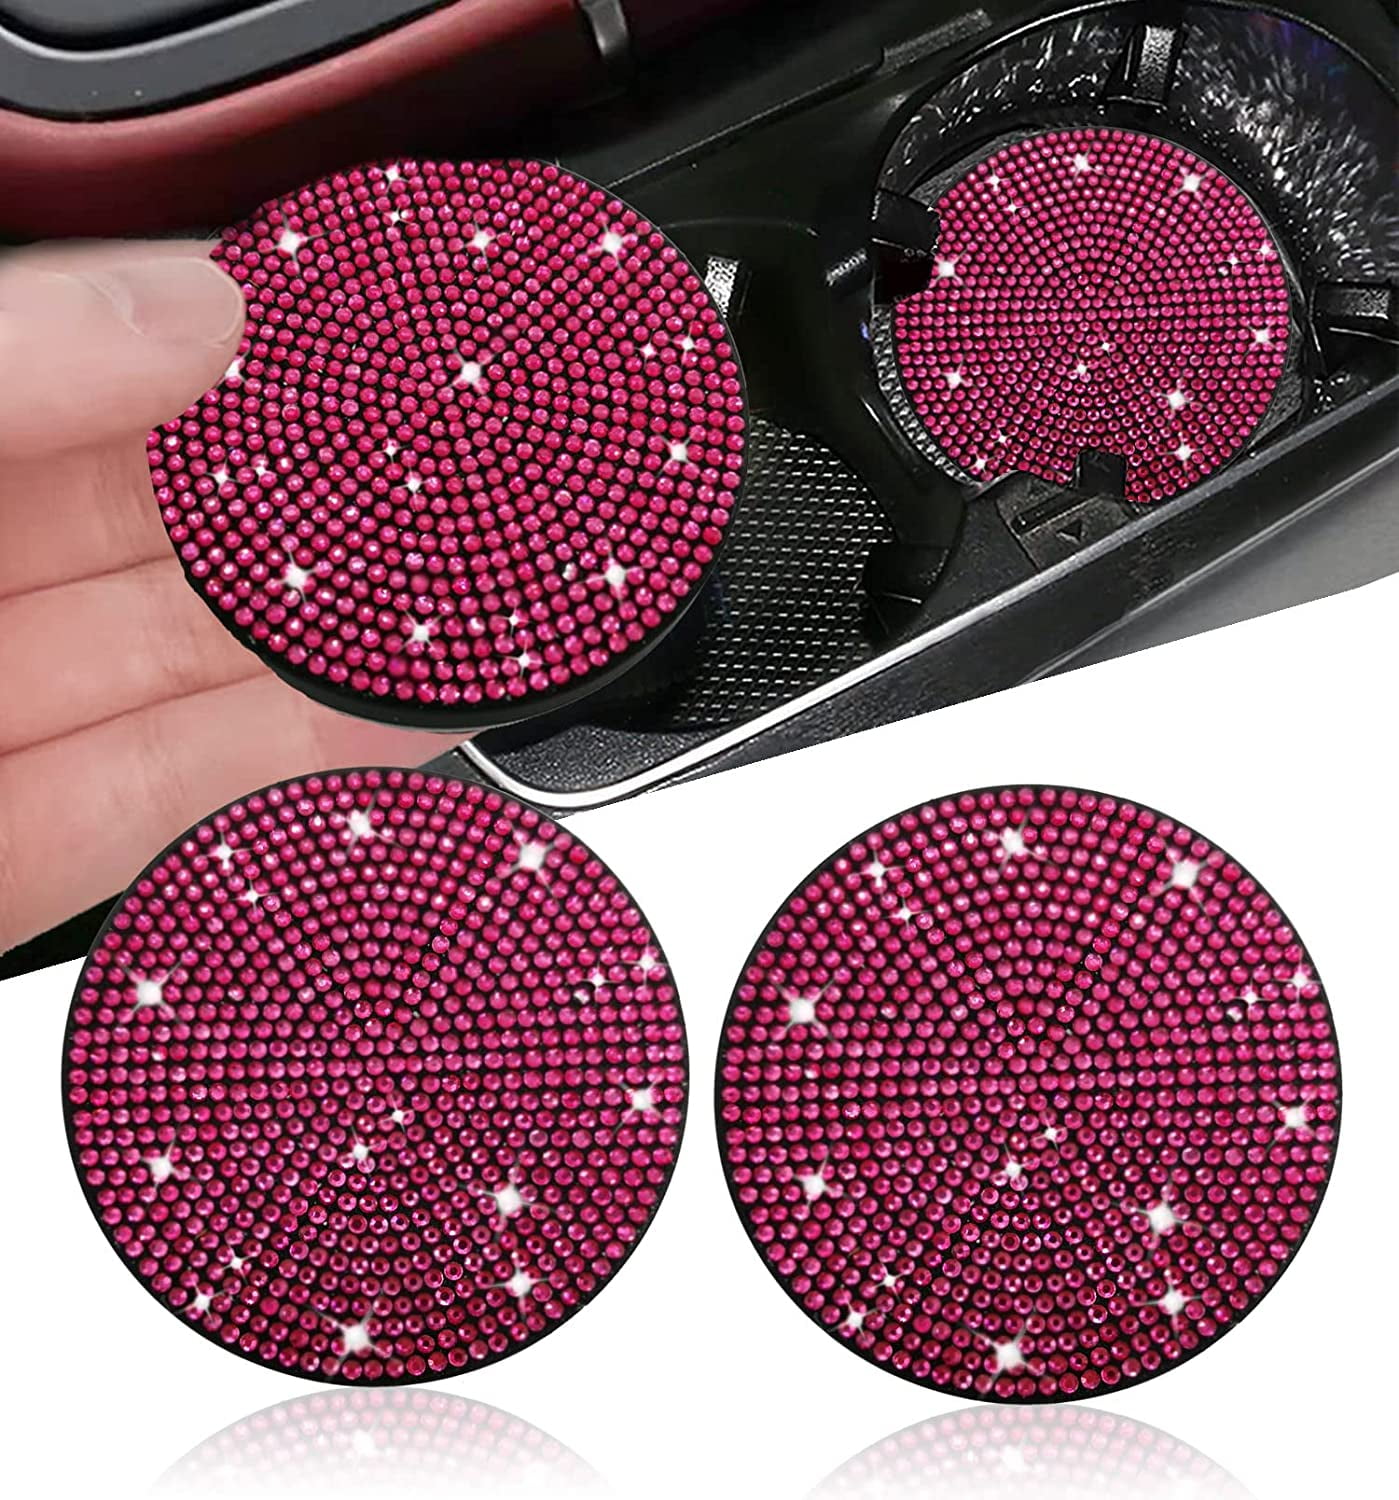 2pcs Bling Car Cup Coaster, 2.75 inch Auto Car Cup Holder Insert Coasters Silicone Anti-Slip Crystal Rhinestone Drink Car Cup Mat, Universal Vehicle